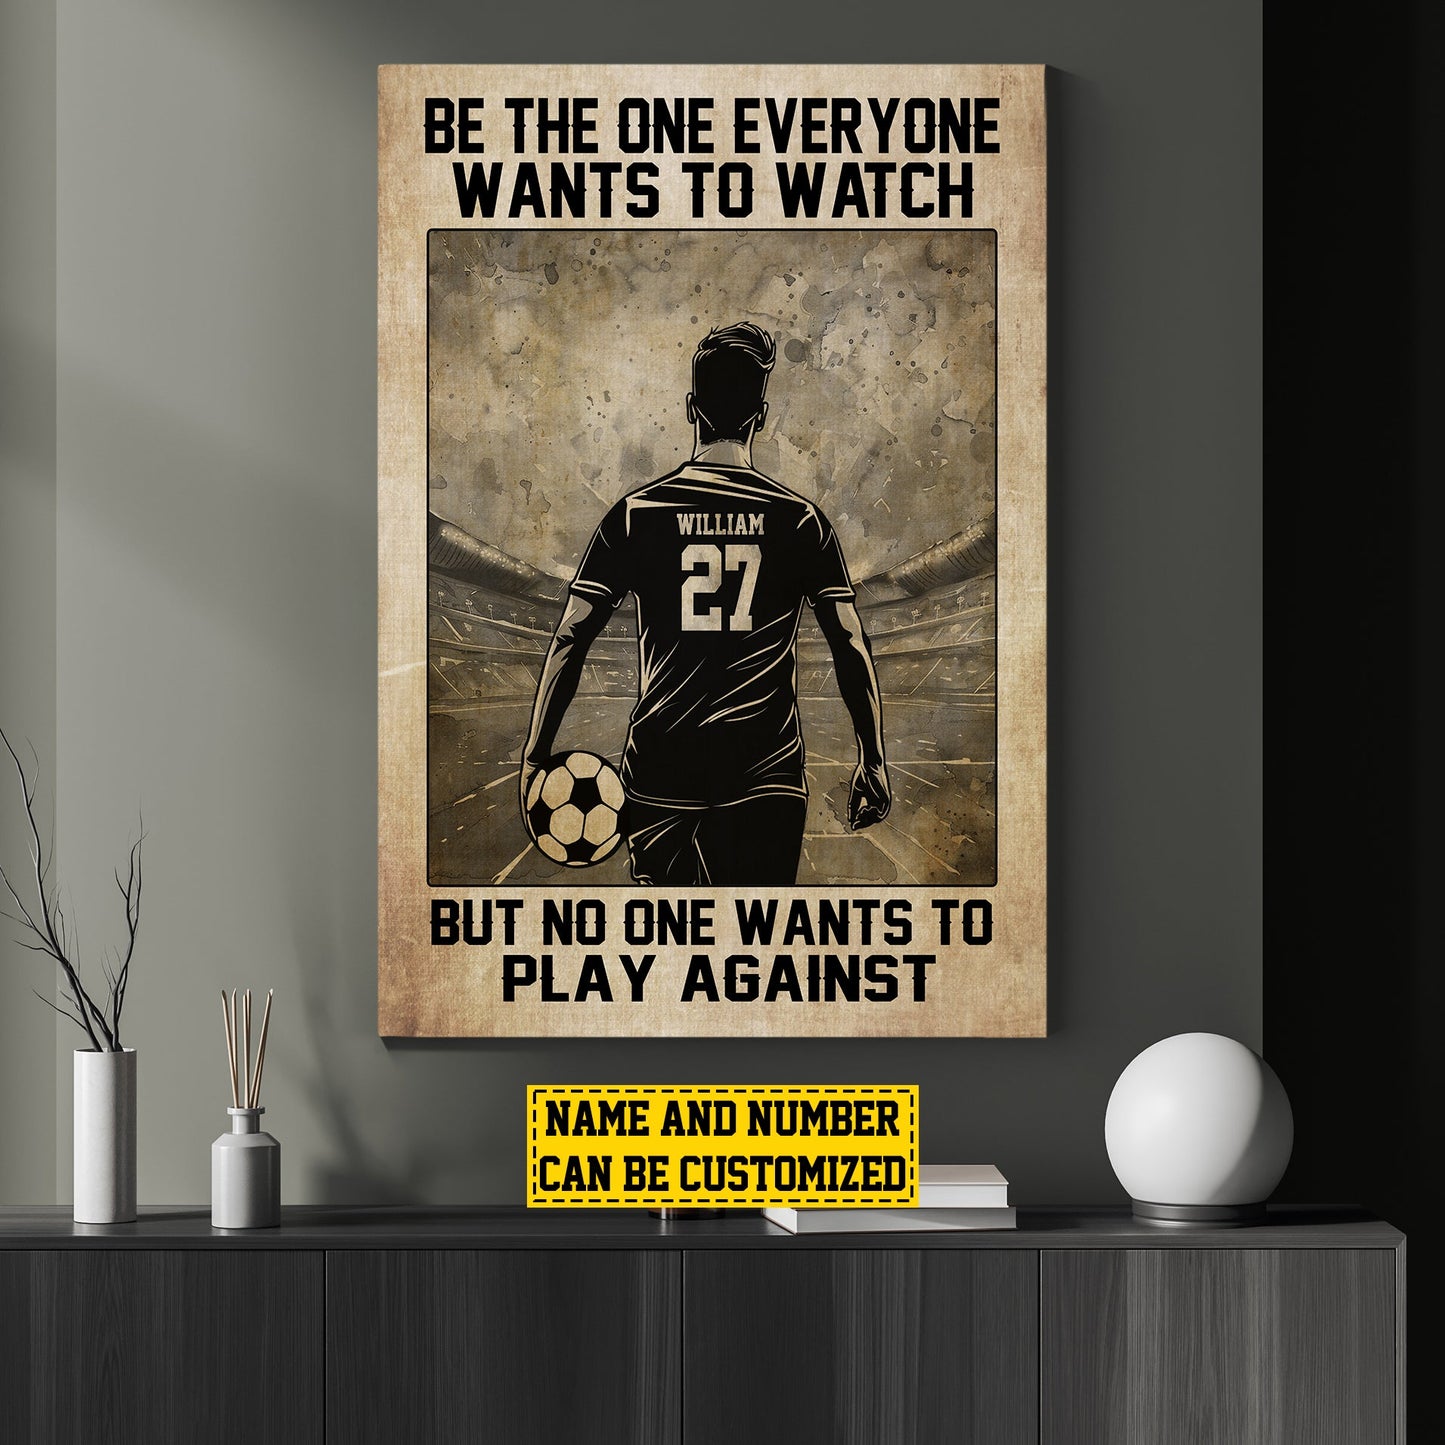 Be The One Everyone Wants To Watch, Personalized Motivational Soccer Boy Canvas Painting, Inspirational Quotes Wall Art Decor, Poster Gift For Soccer Man Lovers, Soccer Players